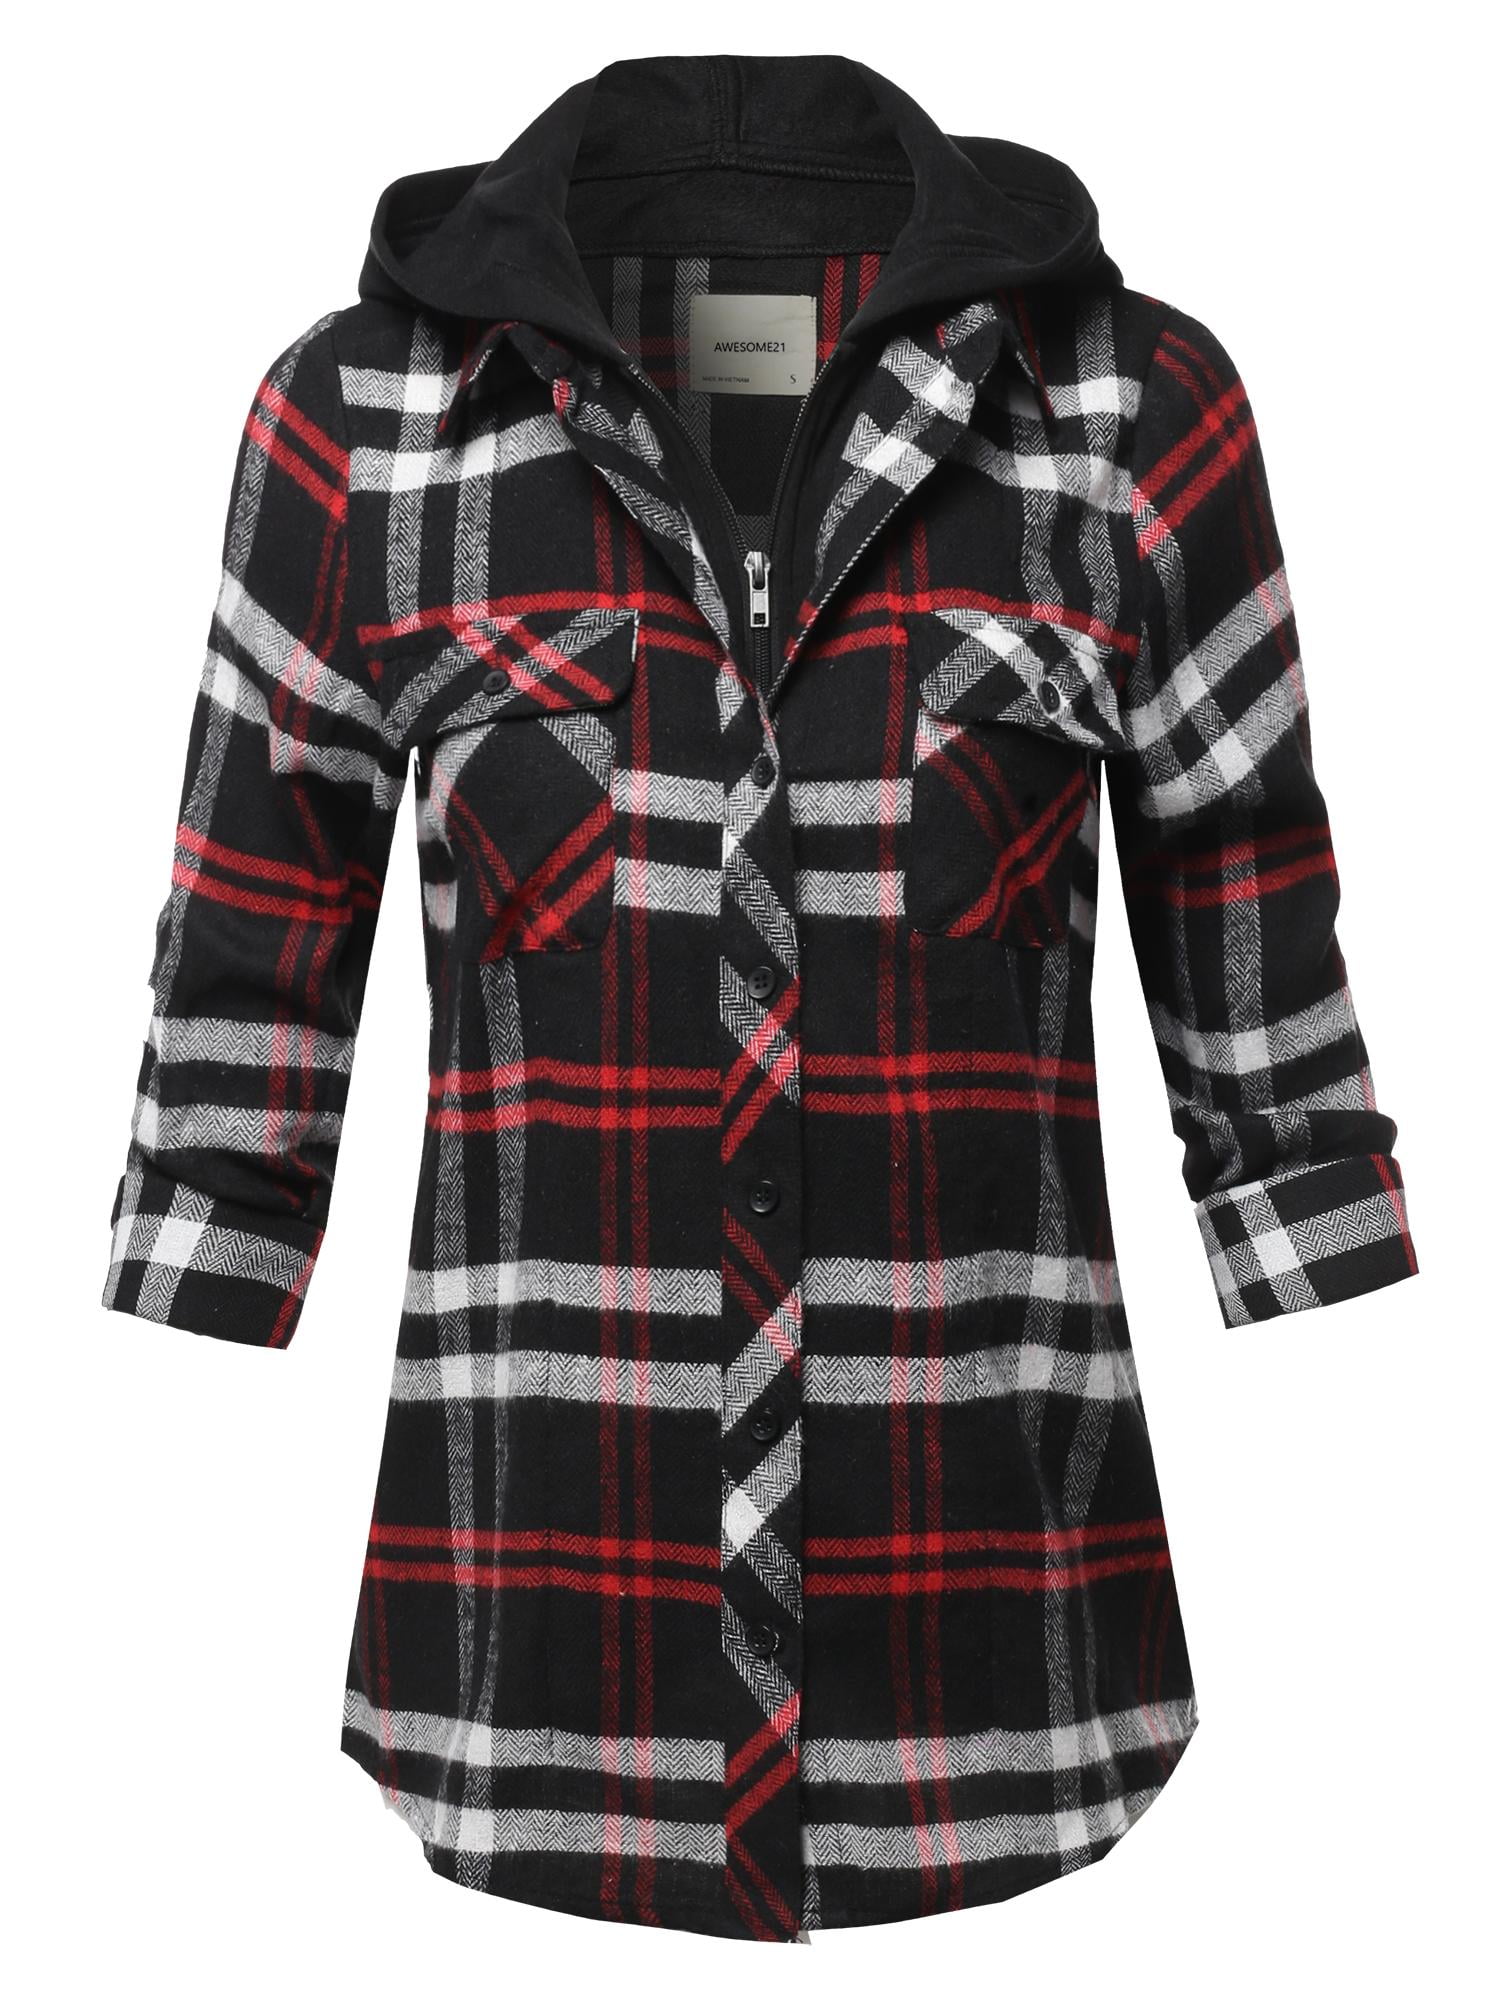 Awesome21 Womens Casual Hooded Flannel Plaid Shirt